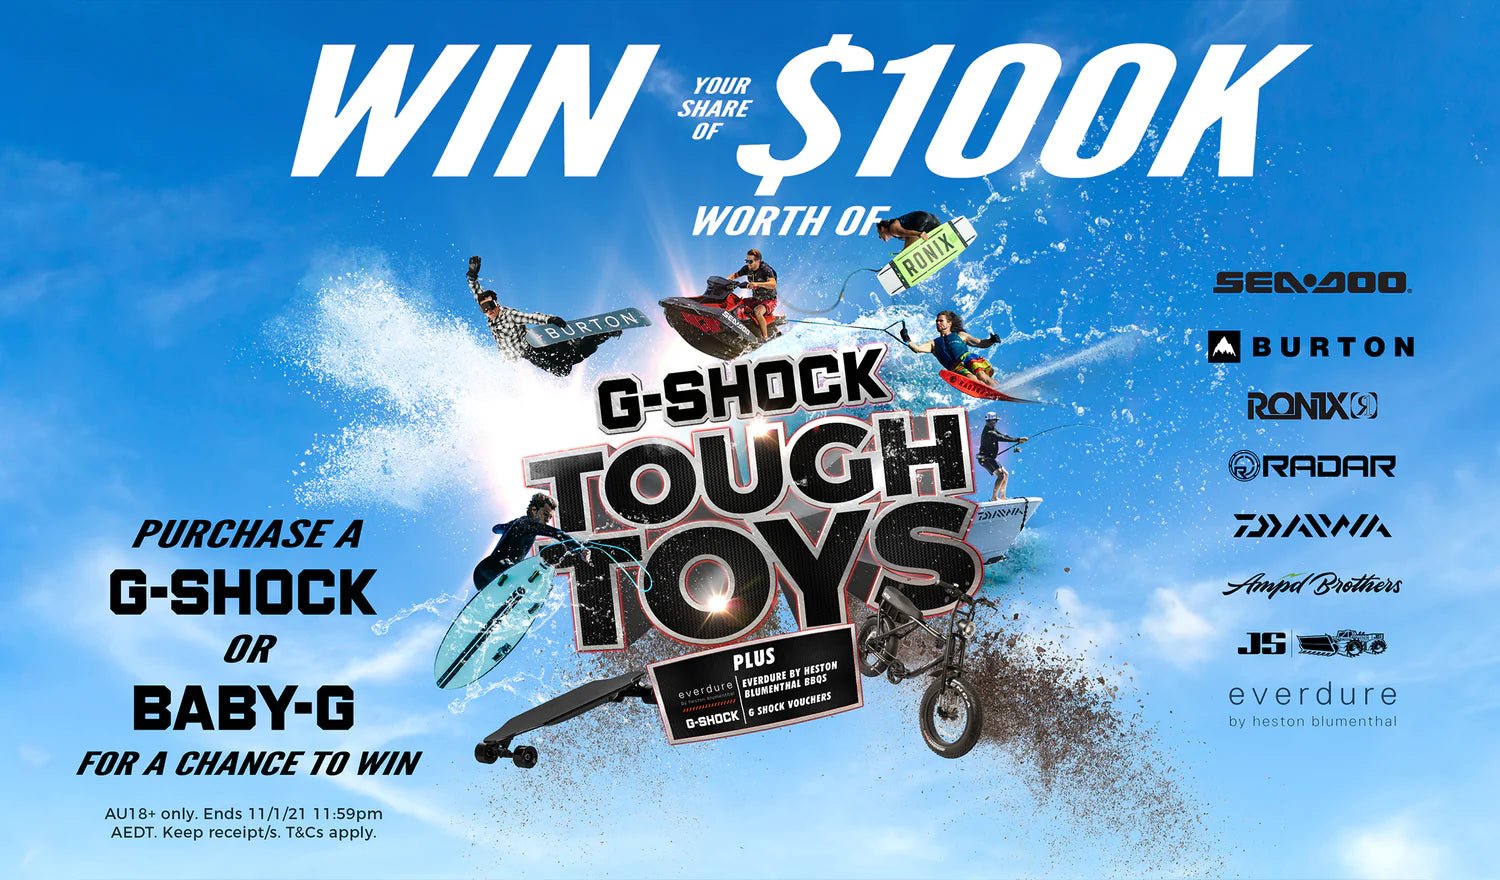 OVER $100,000 WORTH OF PRIZES TO WIN! The G-SHOCK Tough Toys Comp is here! - CASIO Australia